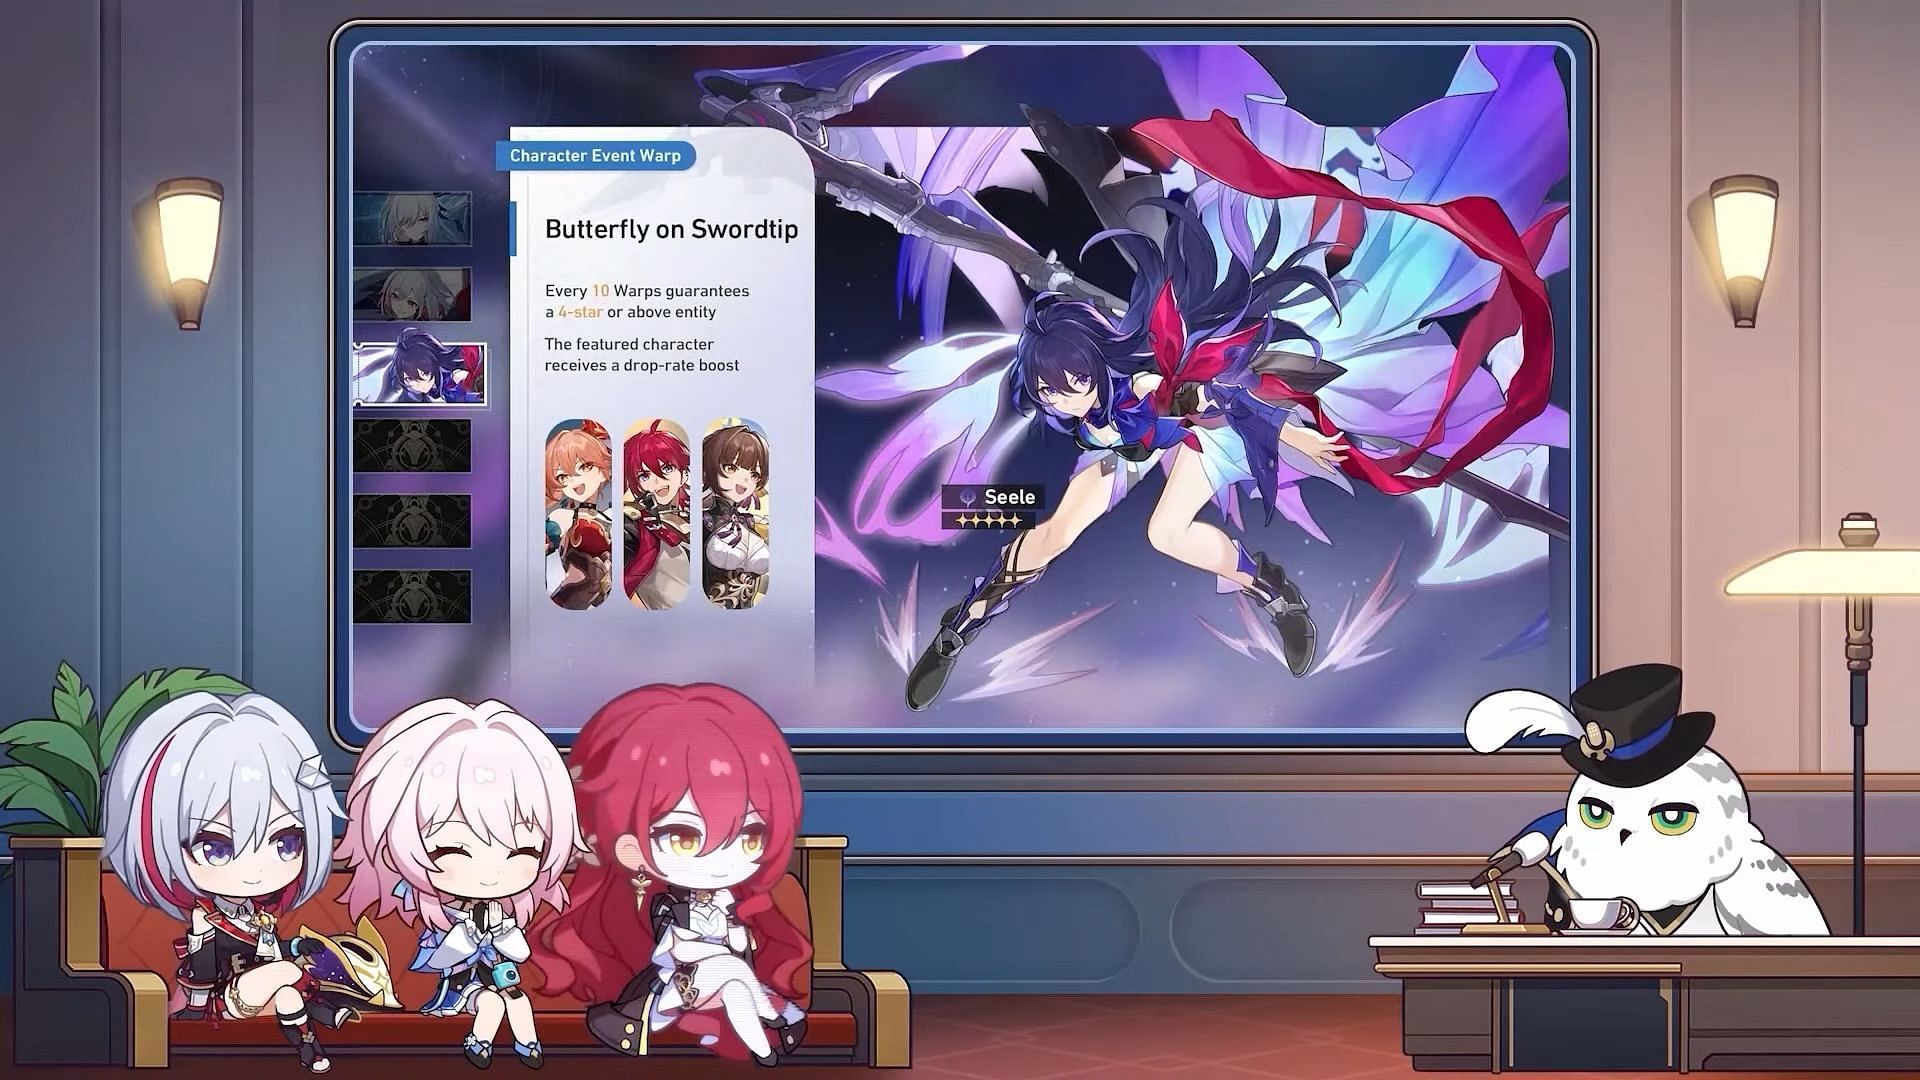 Seele banner was showcased in the version 1.4 livestream (Image via HoYoverse)